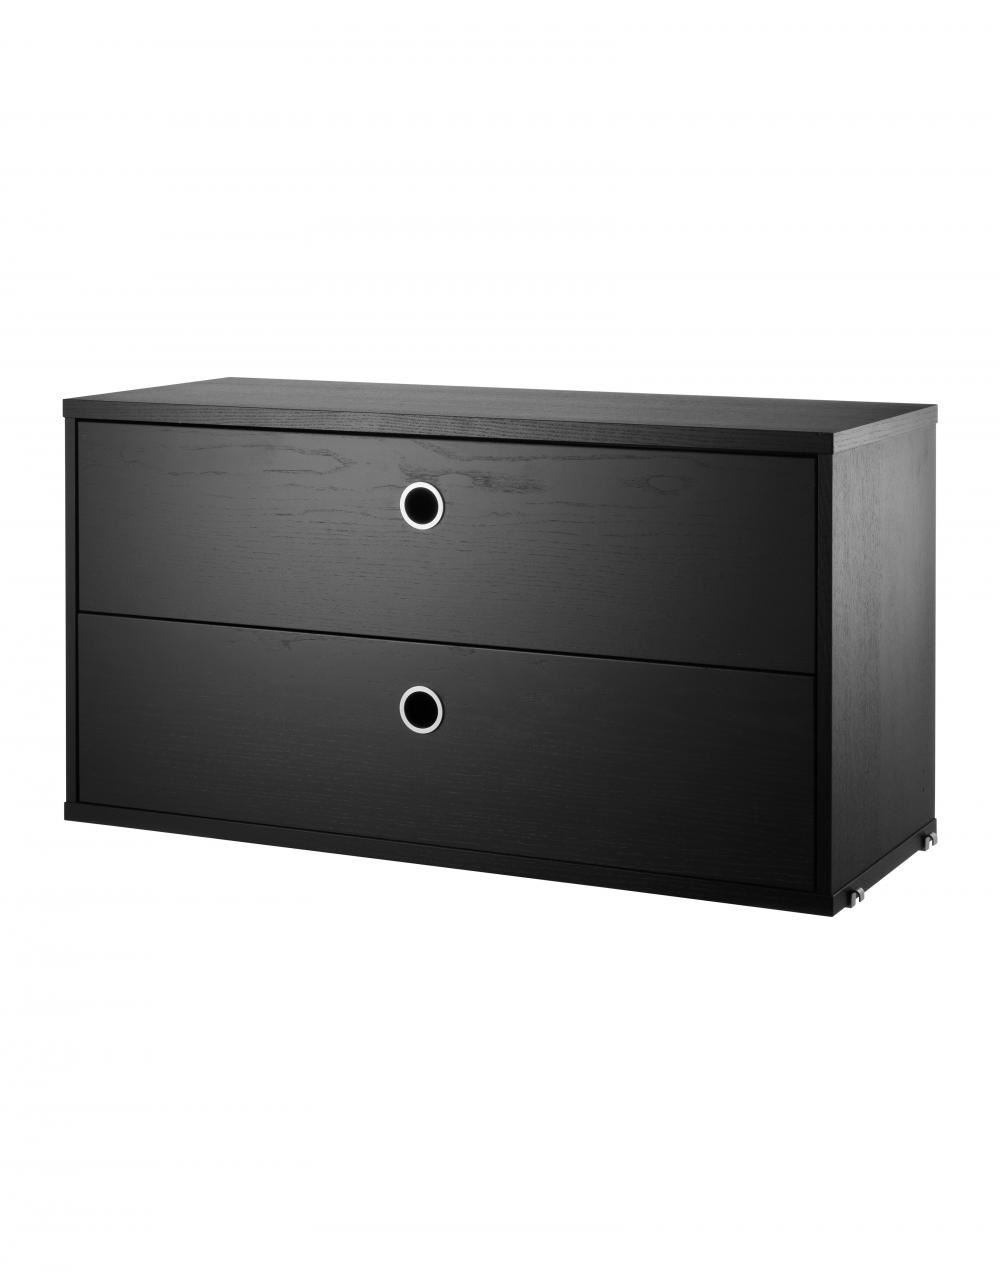 String Chest Of Drawers 78 30 Black Stained Ash